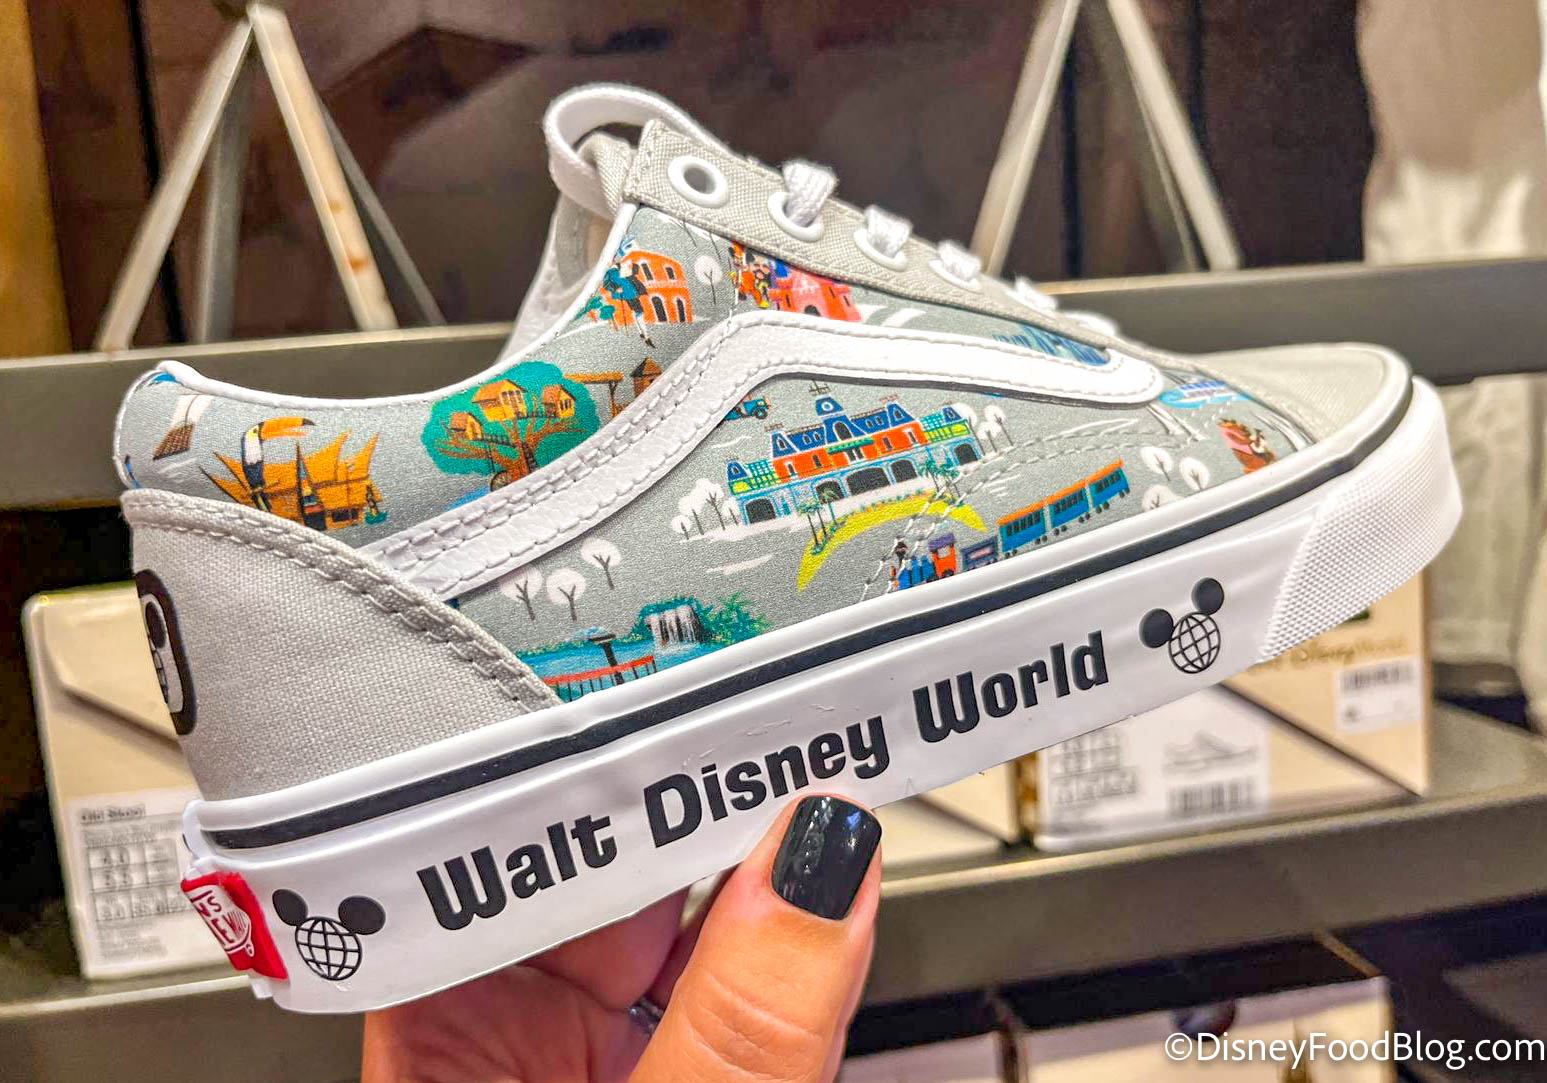 NEW Disney x Vans 50th Anniversary Items Are Now In Magic Kingdom